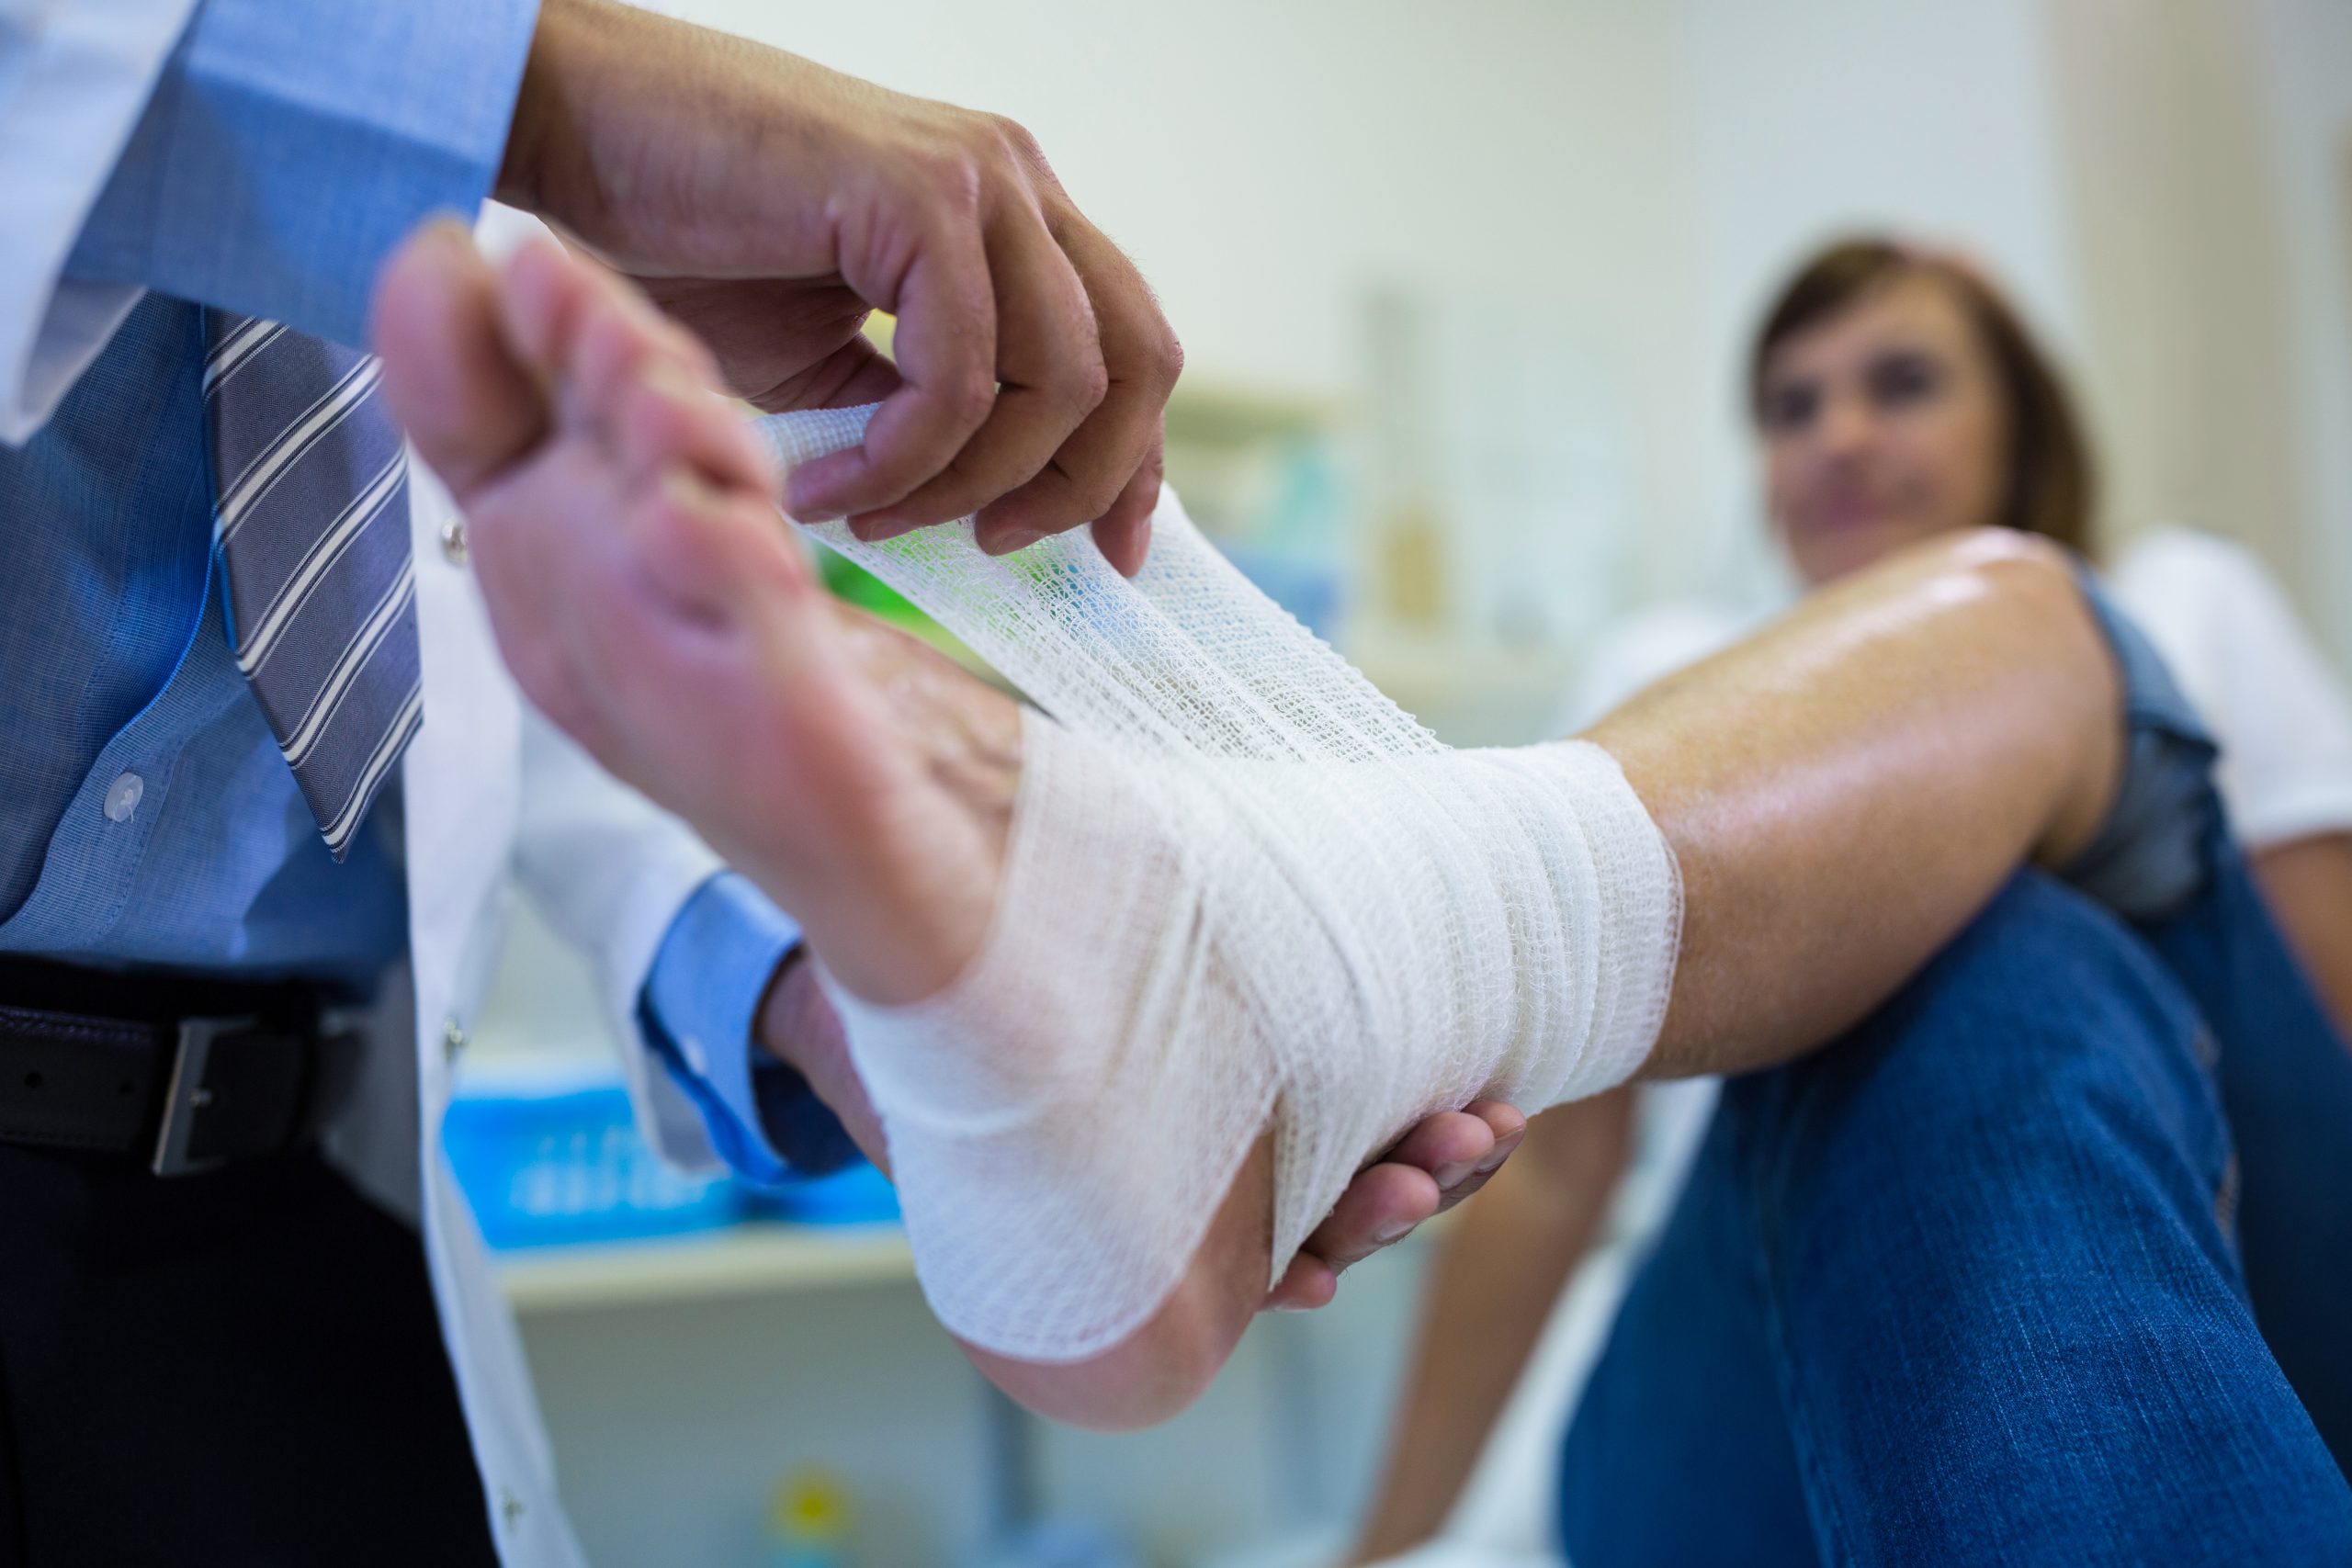 Orthopaedic Emergencies: What to Do and Where to Go in Indore